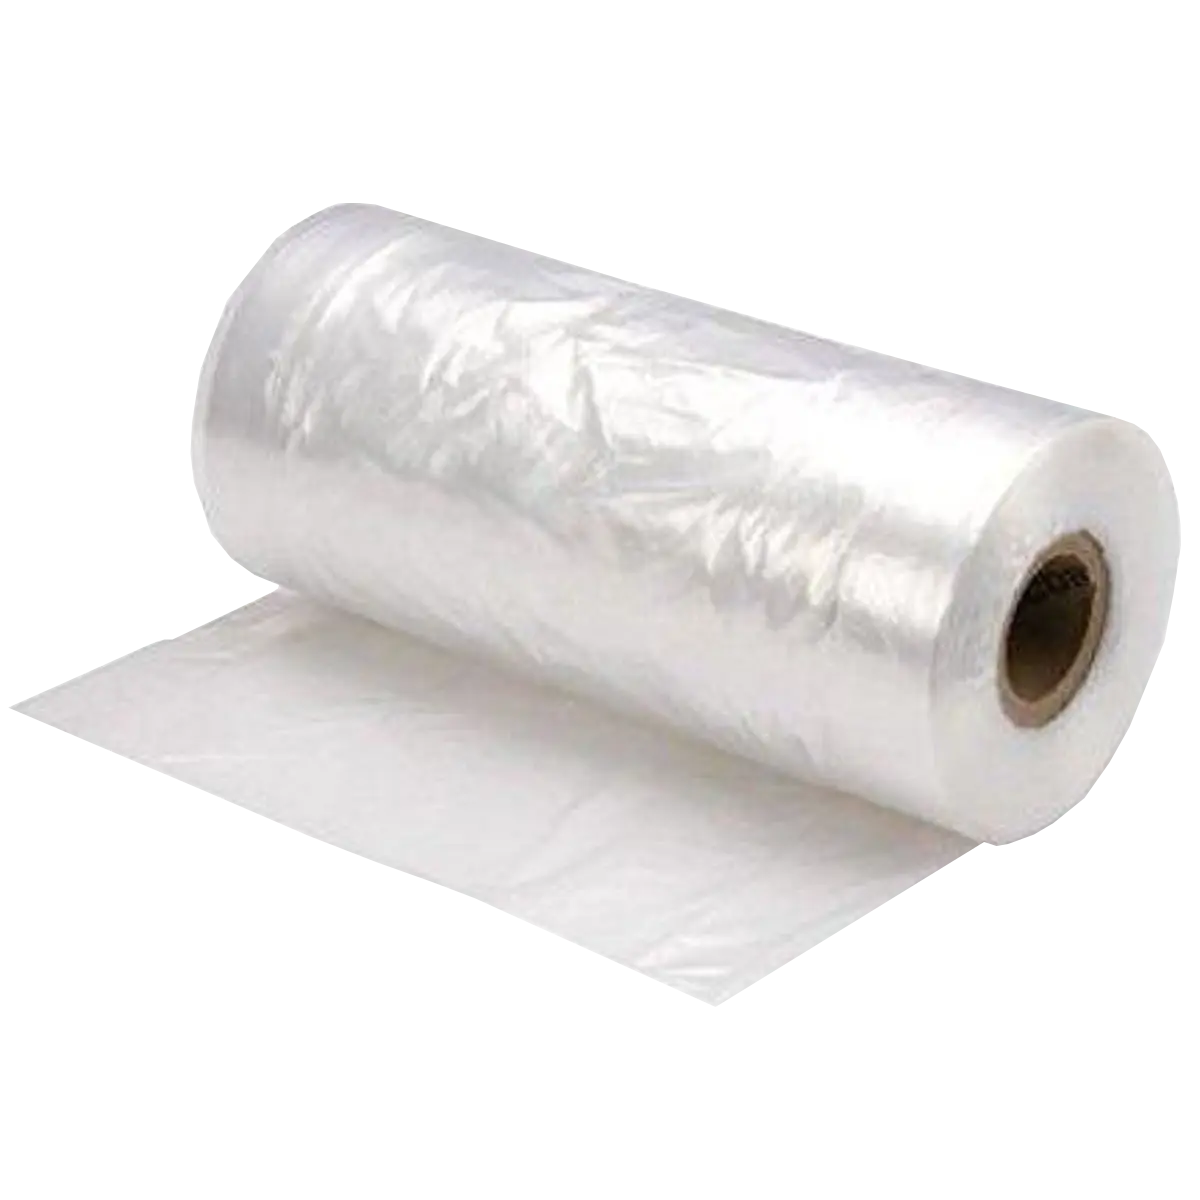 Garment cover on a roll keeps dresses, jackets, coats, shirts, suits, trousers clean fresh and dust free